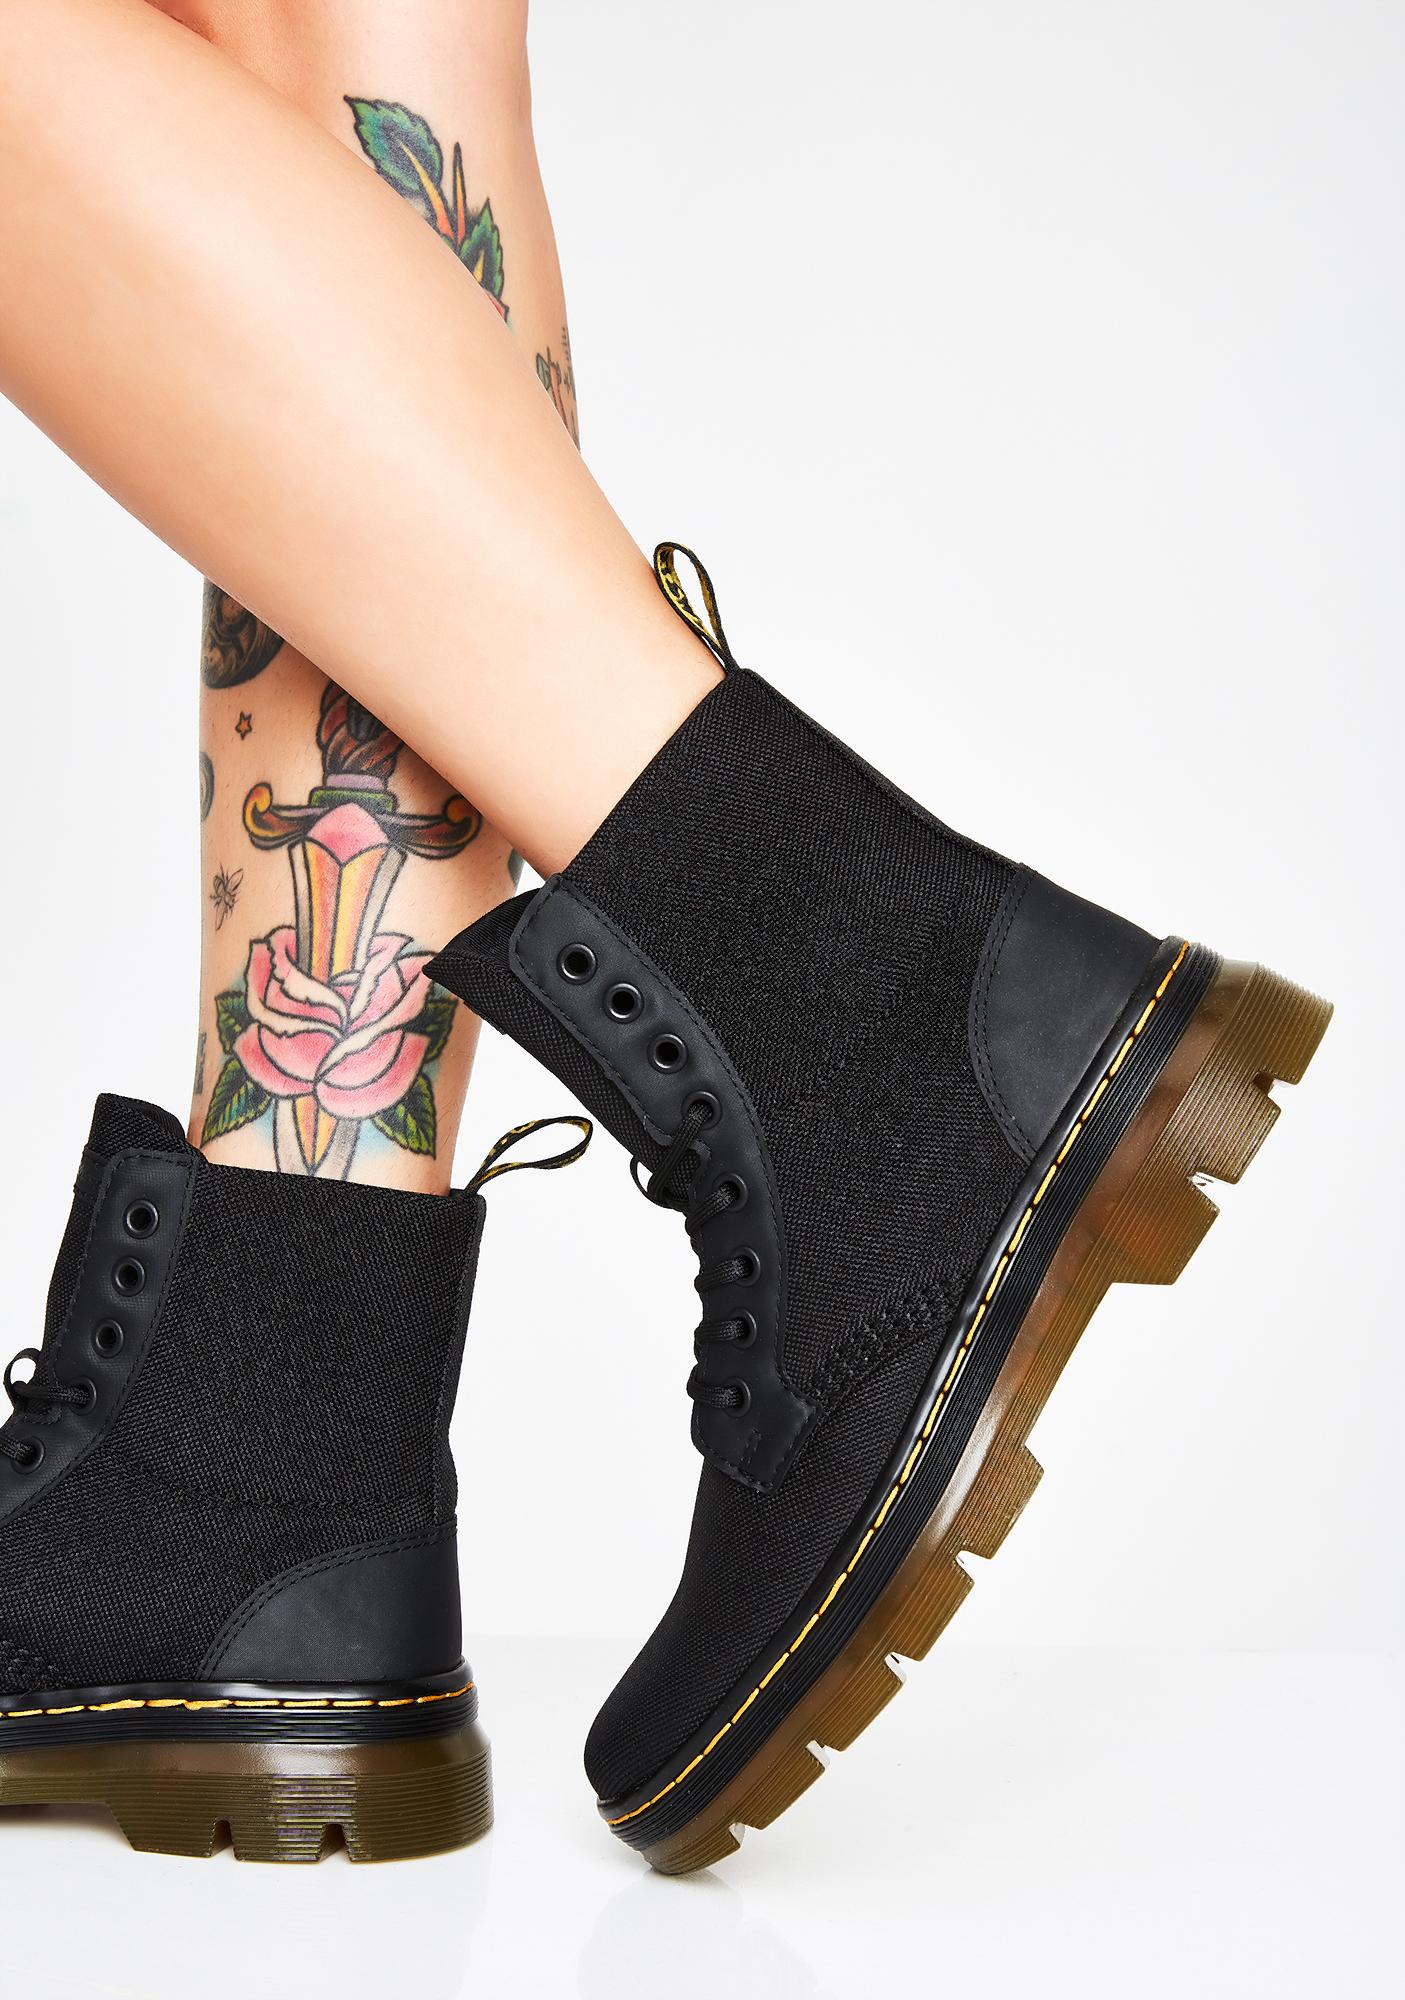 dr martens combs nylon ankle boots in black